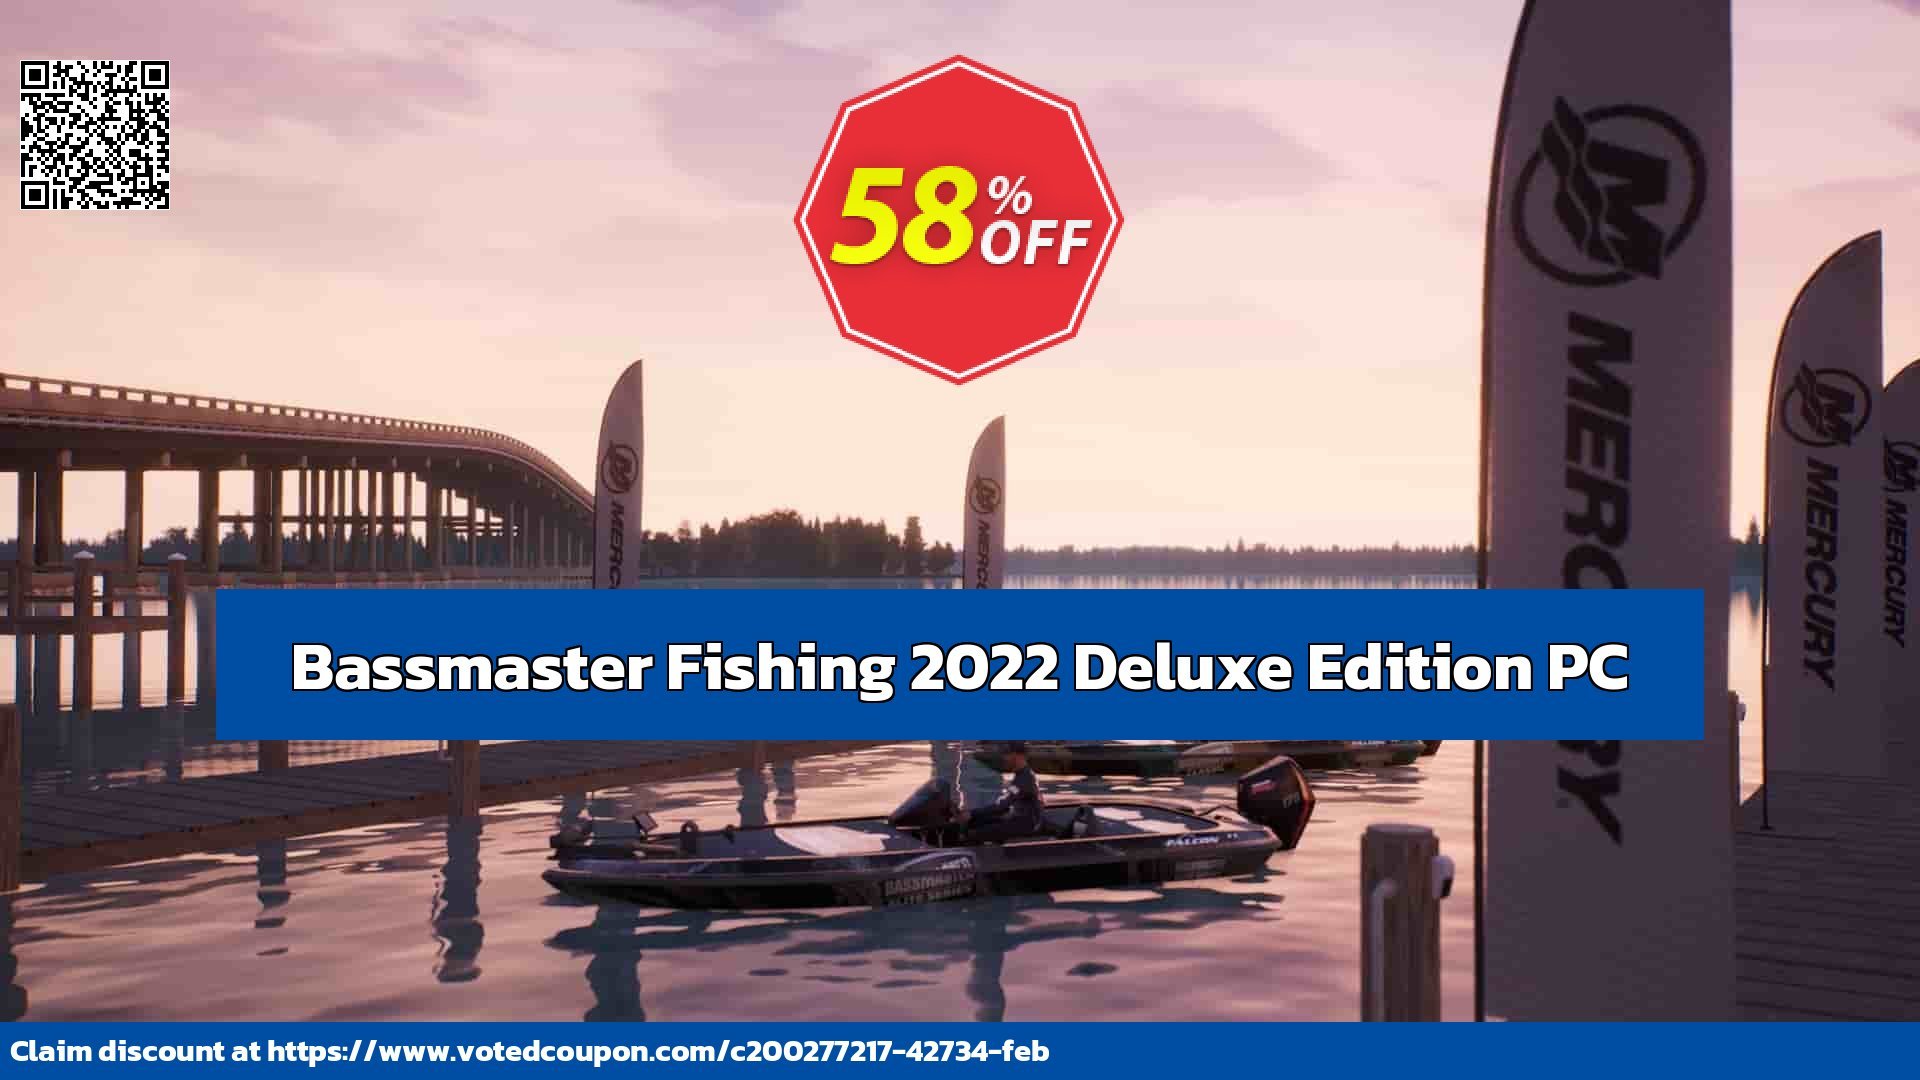 Bassmaster Fishing 2022 Deluxe Edition PC Coupon Code Apr 2024, 58% OFF - VotedCoupon